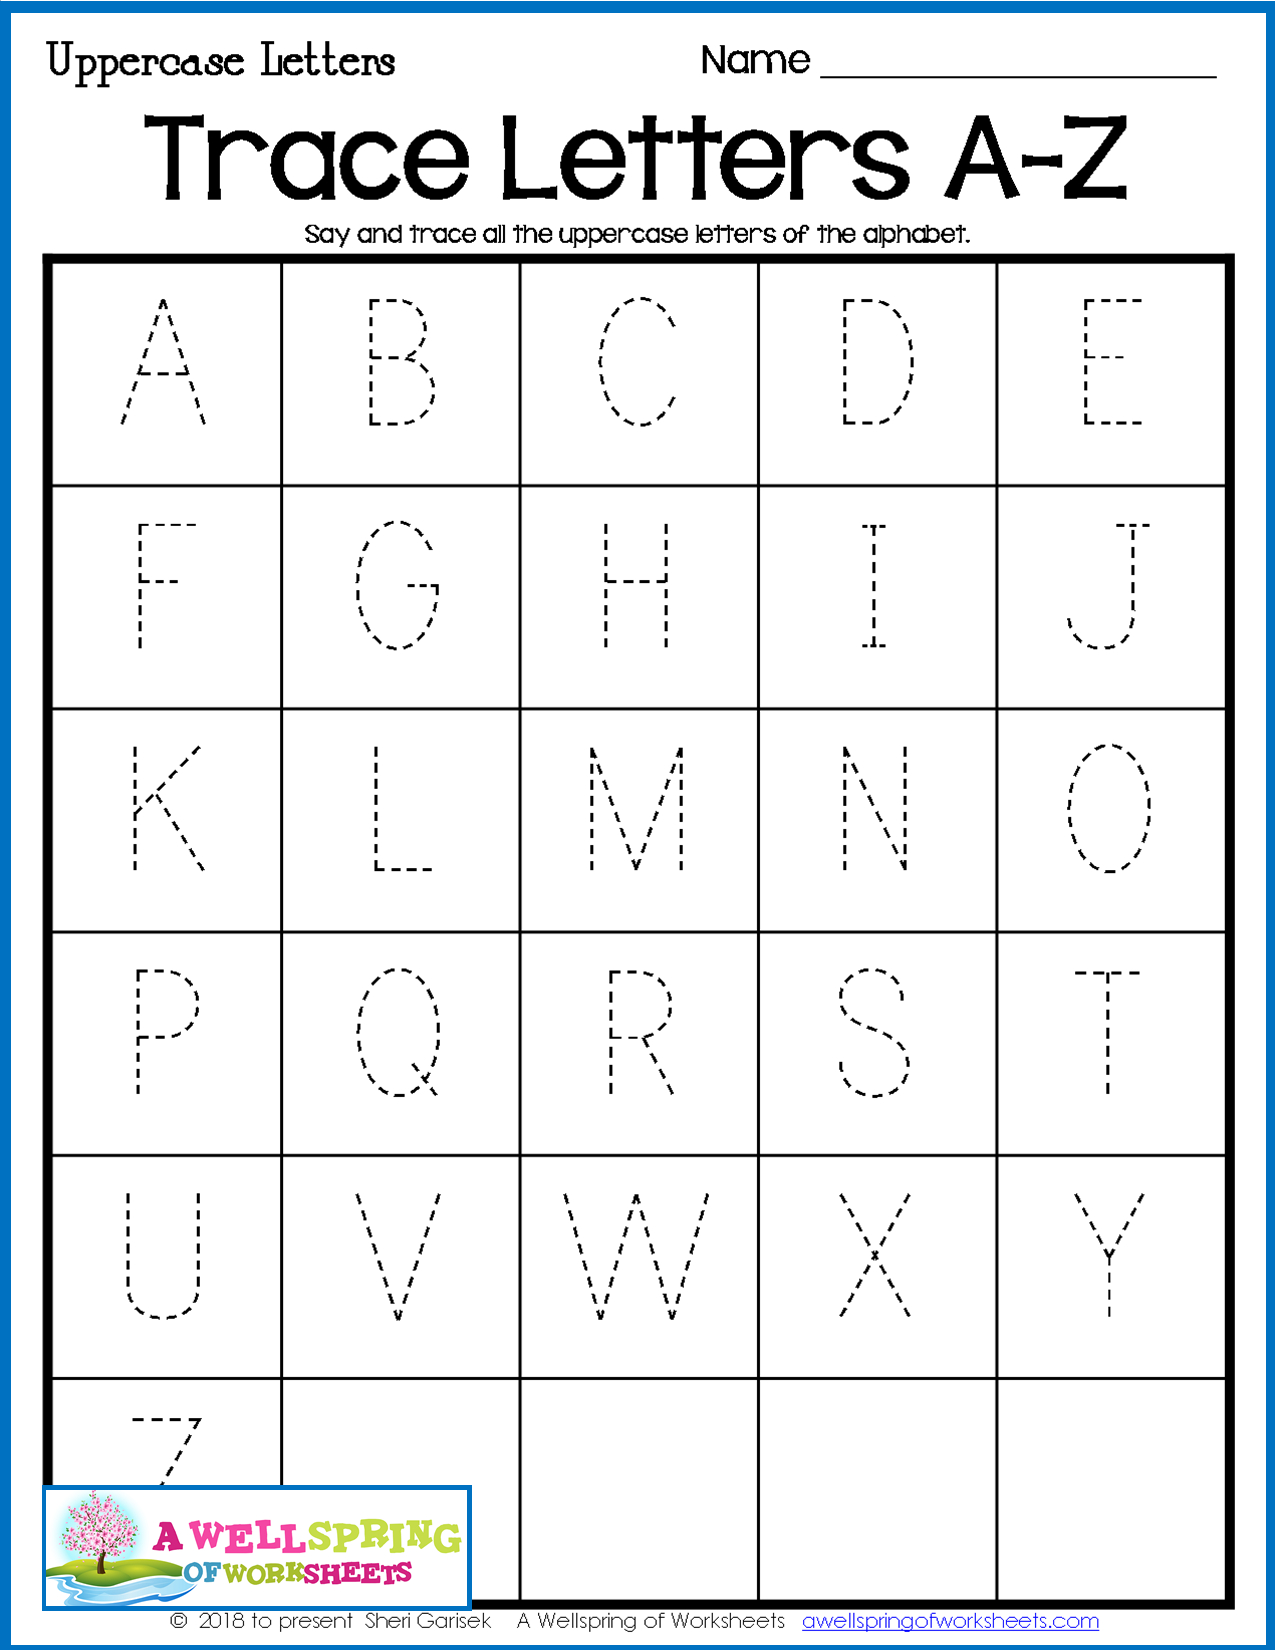 Alphabet Tracing Worksheets - Uppercase &amp;amp; Lowercase Letters intended for Capital And Lowercase Letters Tracing Worksheets